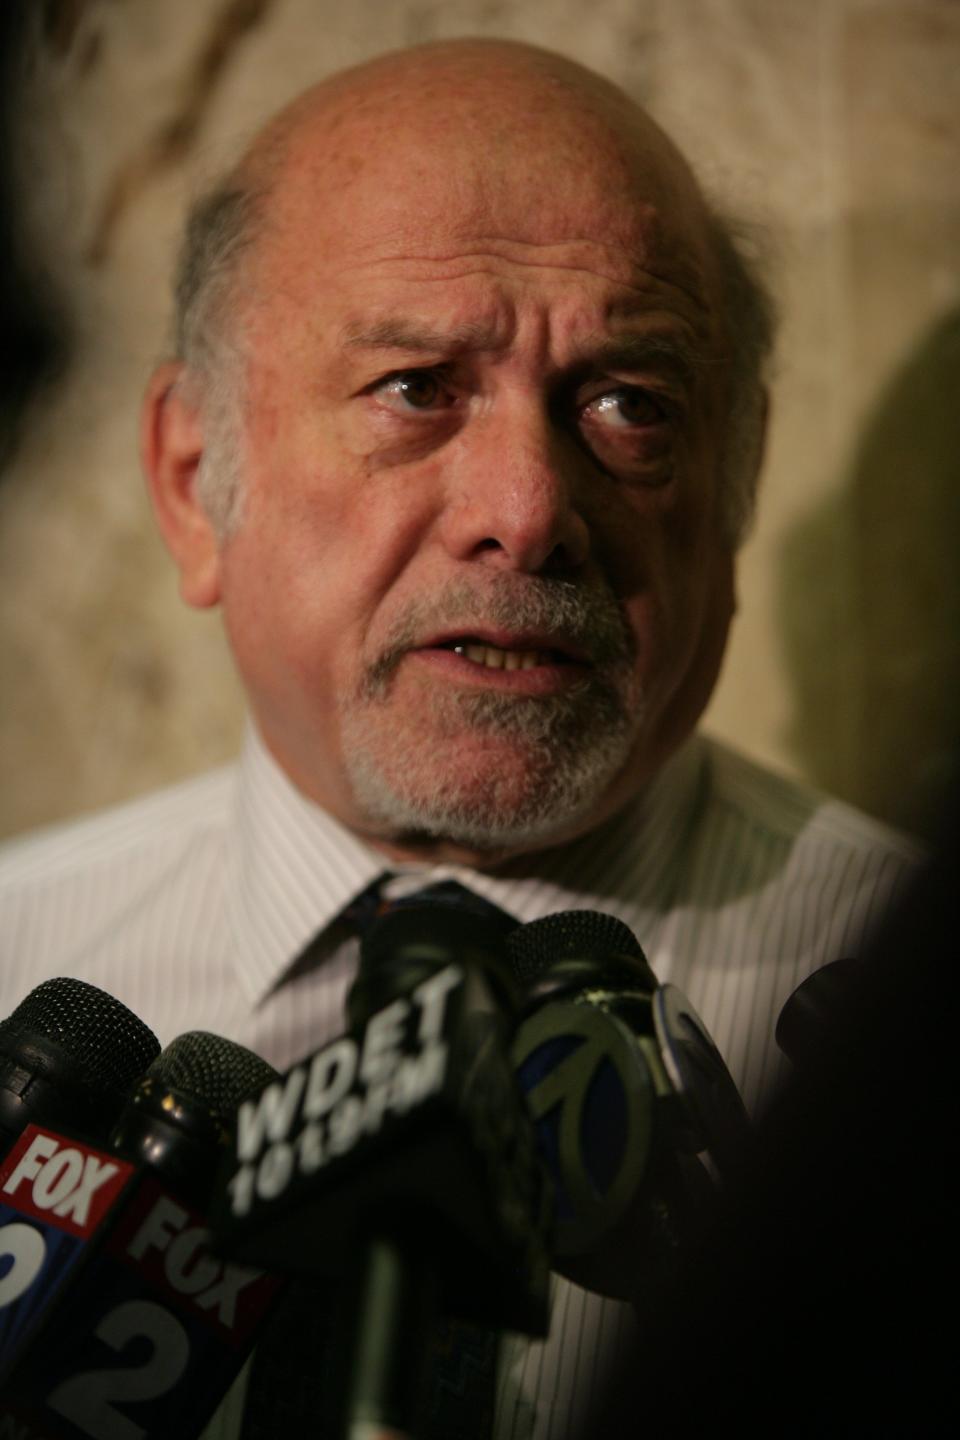 Bill Goodman, pictured here addressing the media in July 2008 while serving as independent counsel to the Detroit City Council, which at the time was considering firing Mayor Kwame Kilpatrick after a texting scandal.